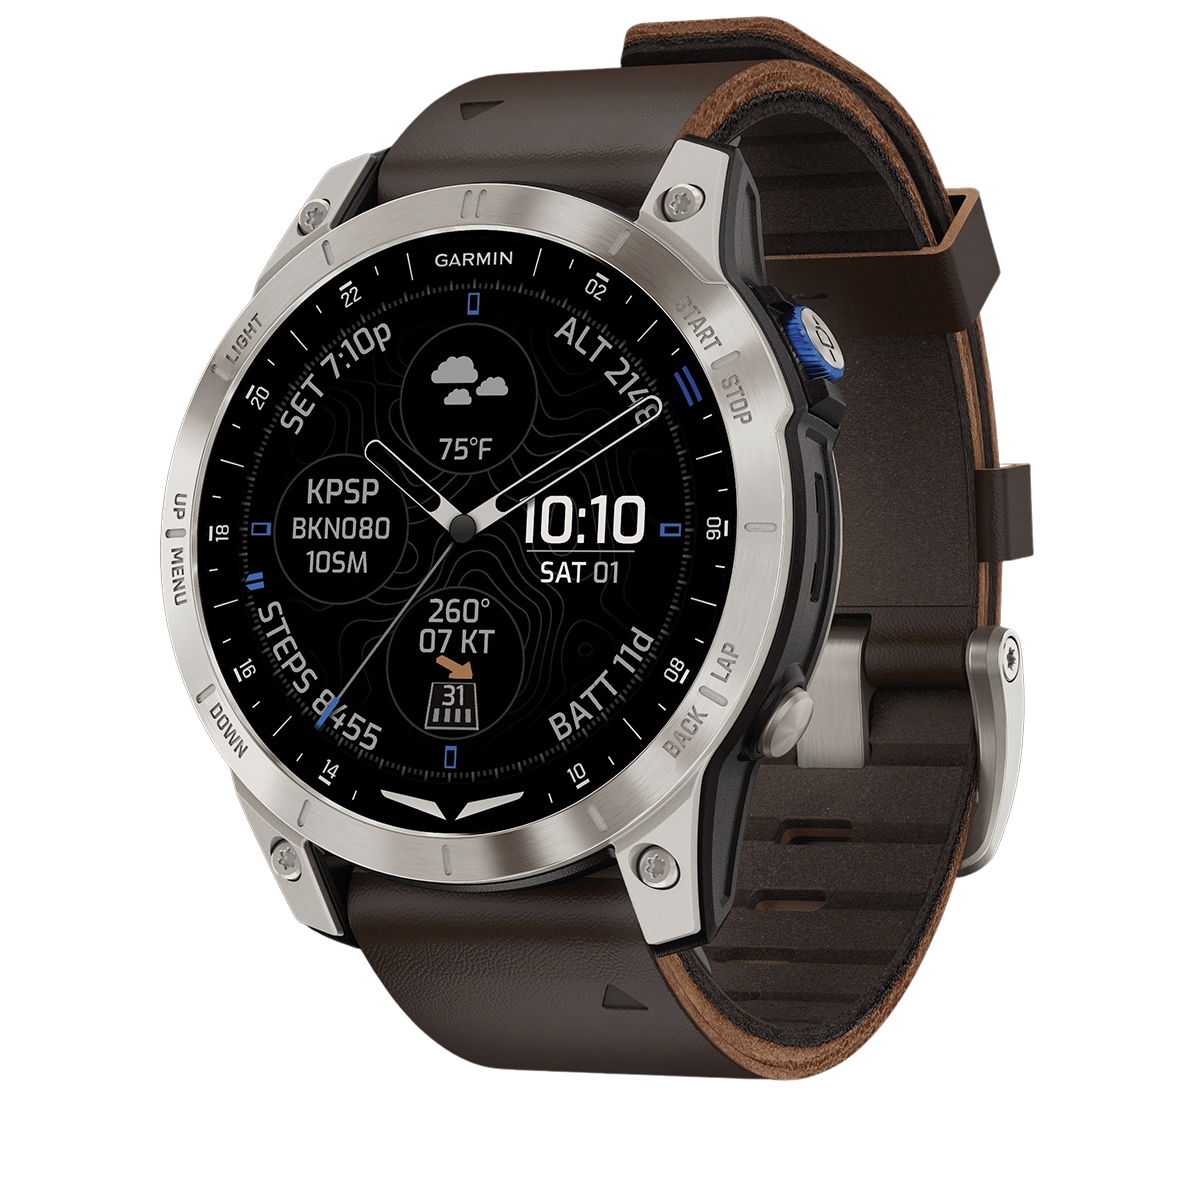 Смарт-годинник Garmin D2™ Mach 1 with Oxford Brown Leather Band (010-02582-54/55)